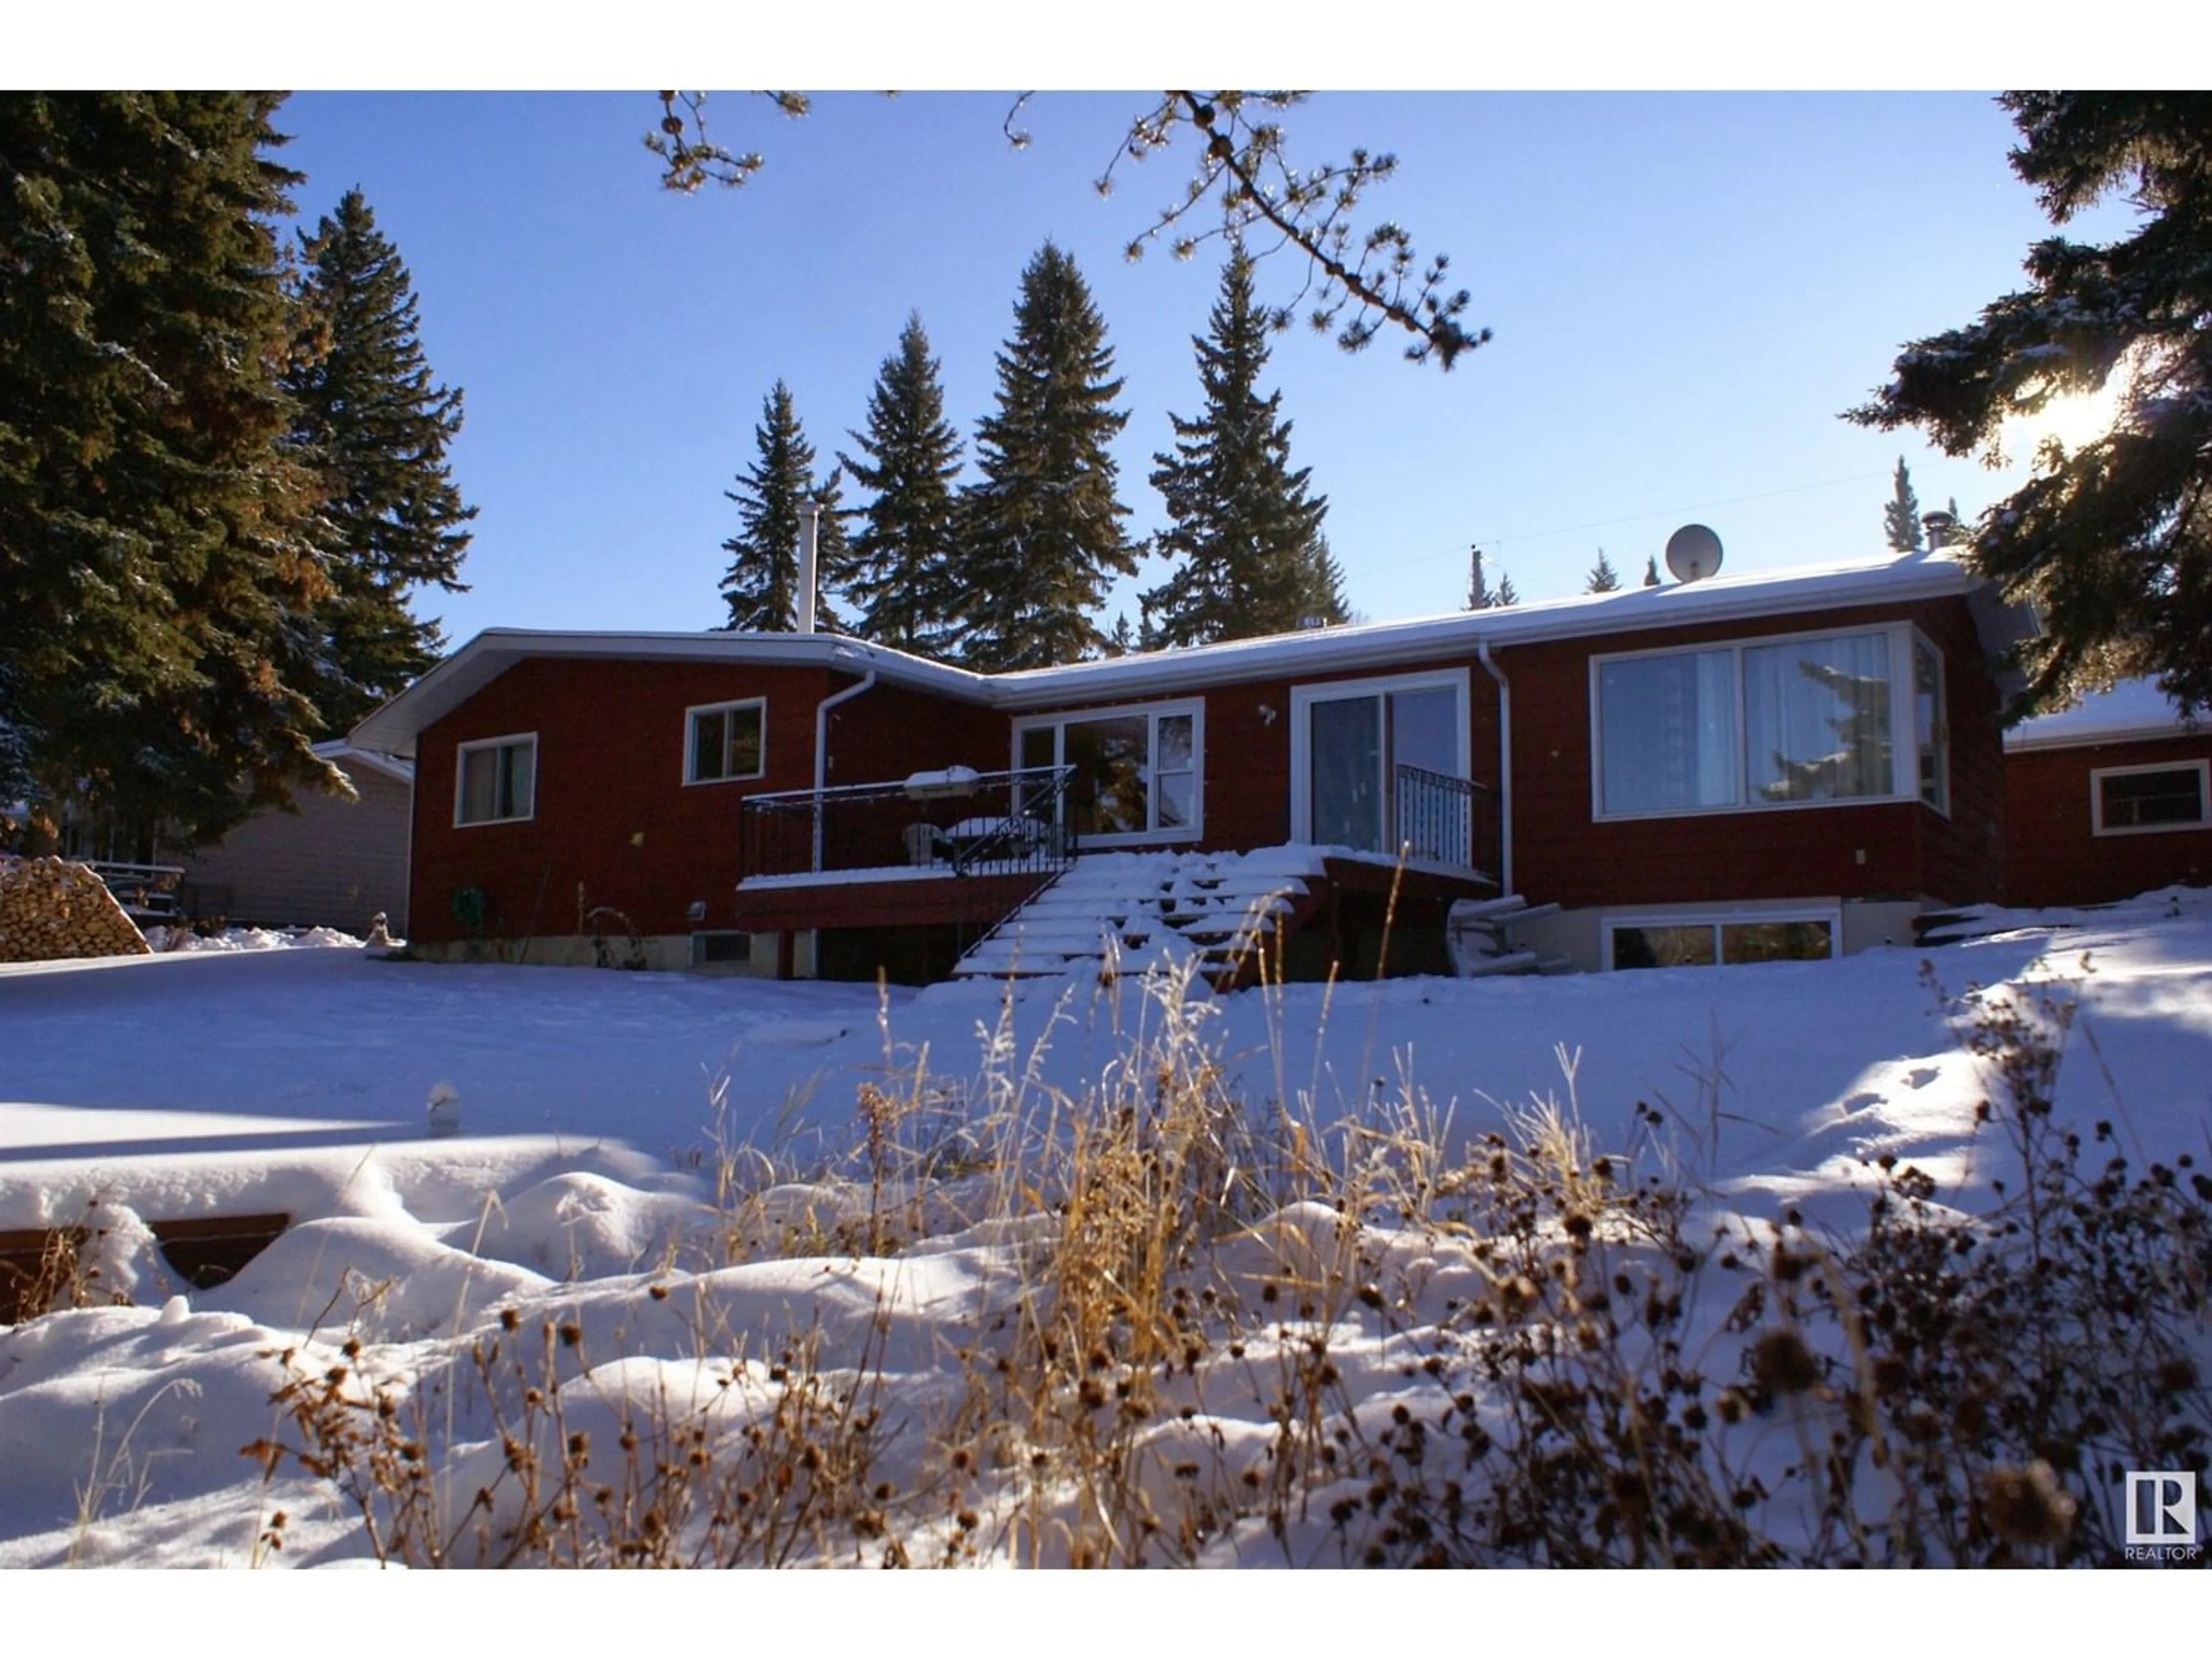 Outside view for 410 Spruce AV, Rural Athabasca County Alberta T0A0M0